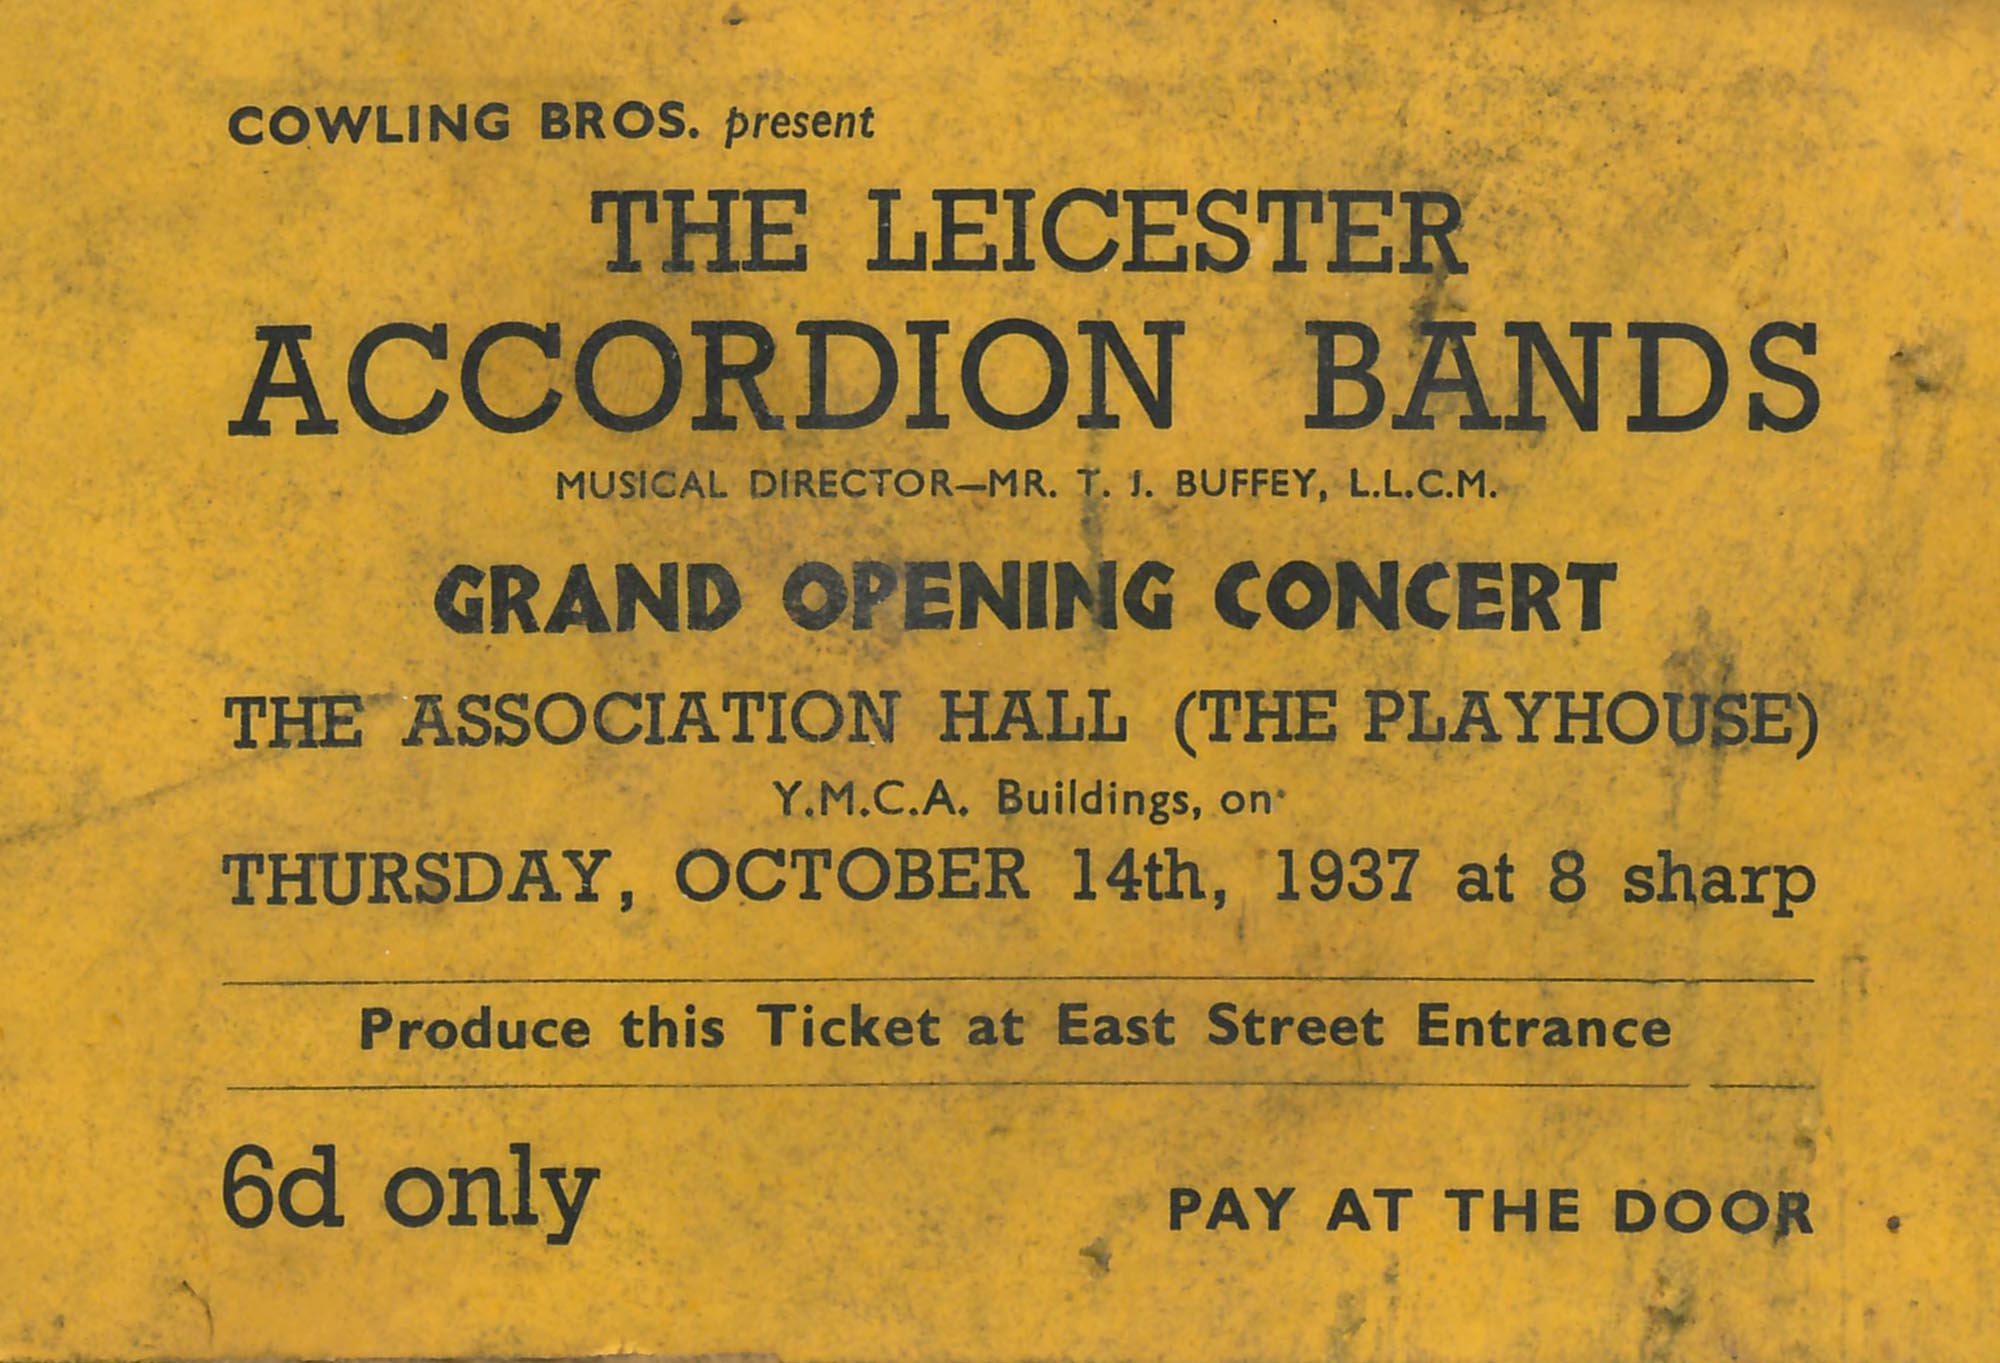 A ticket from a 1937 performance -